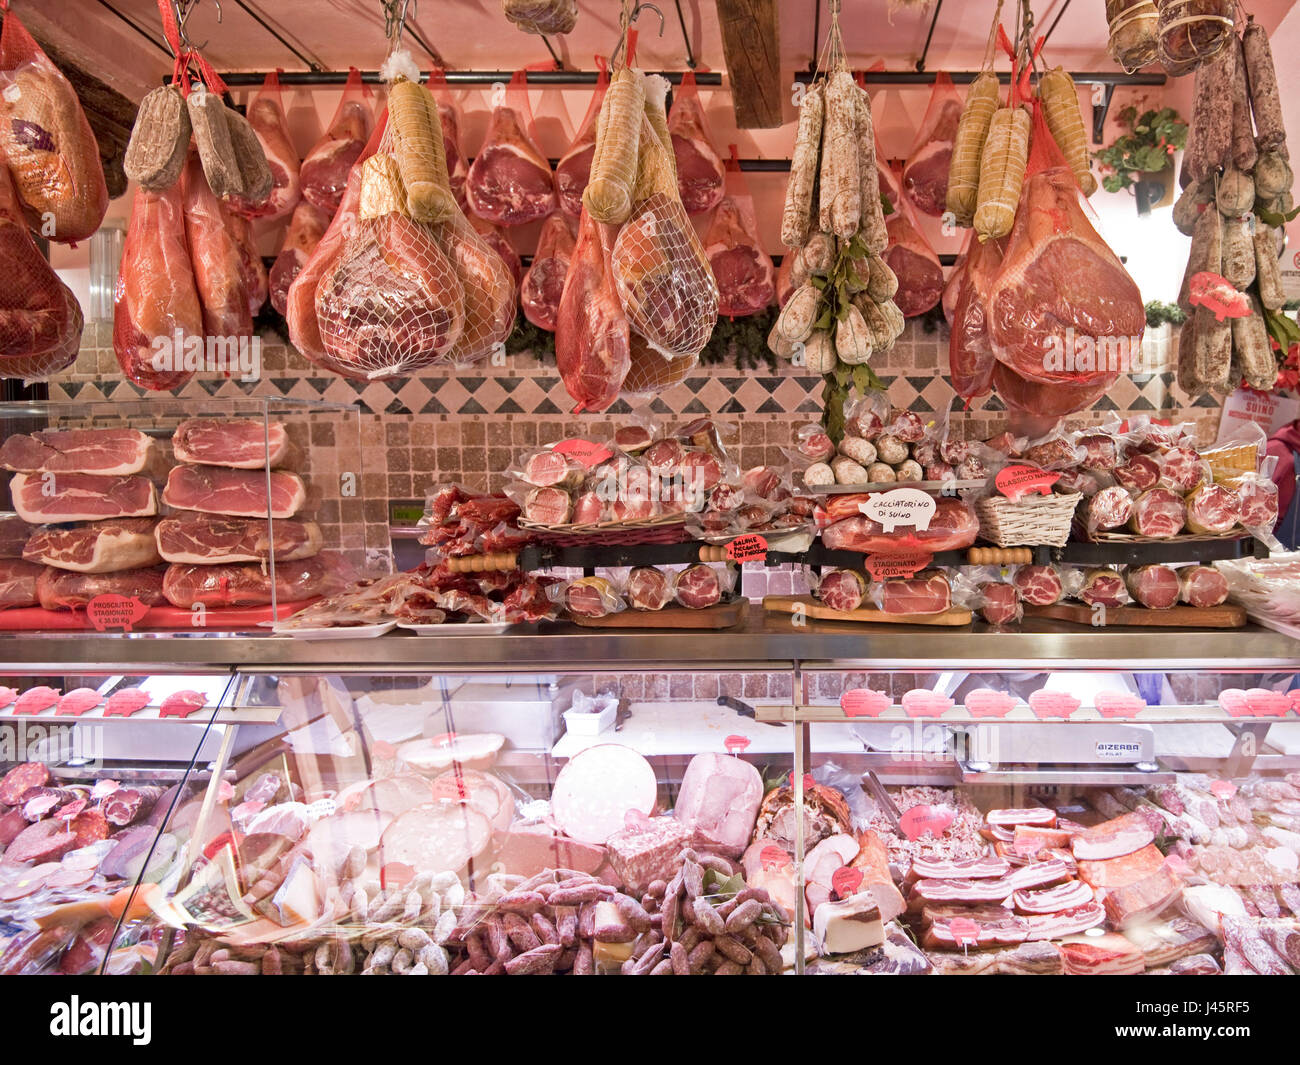 Interior view of a butcher, charcuterie, delicatessen, shop selling traditional Italian cold cuts of meat and whole hams on display. Stock Photo